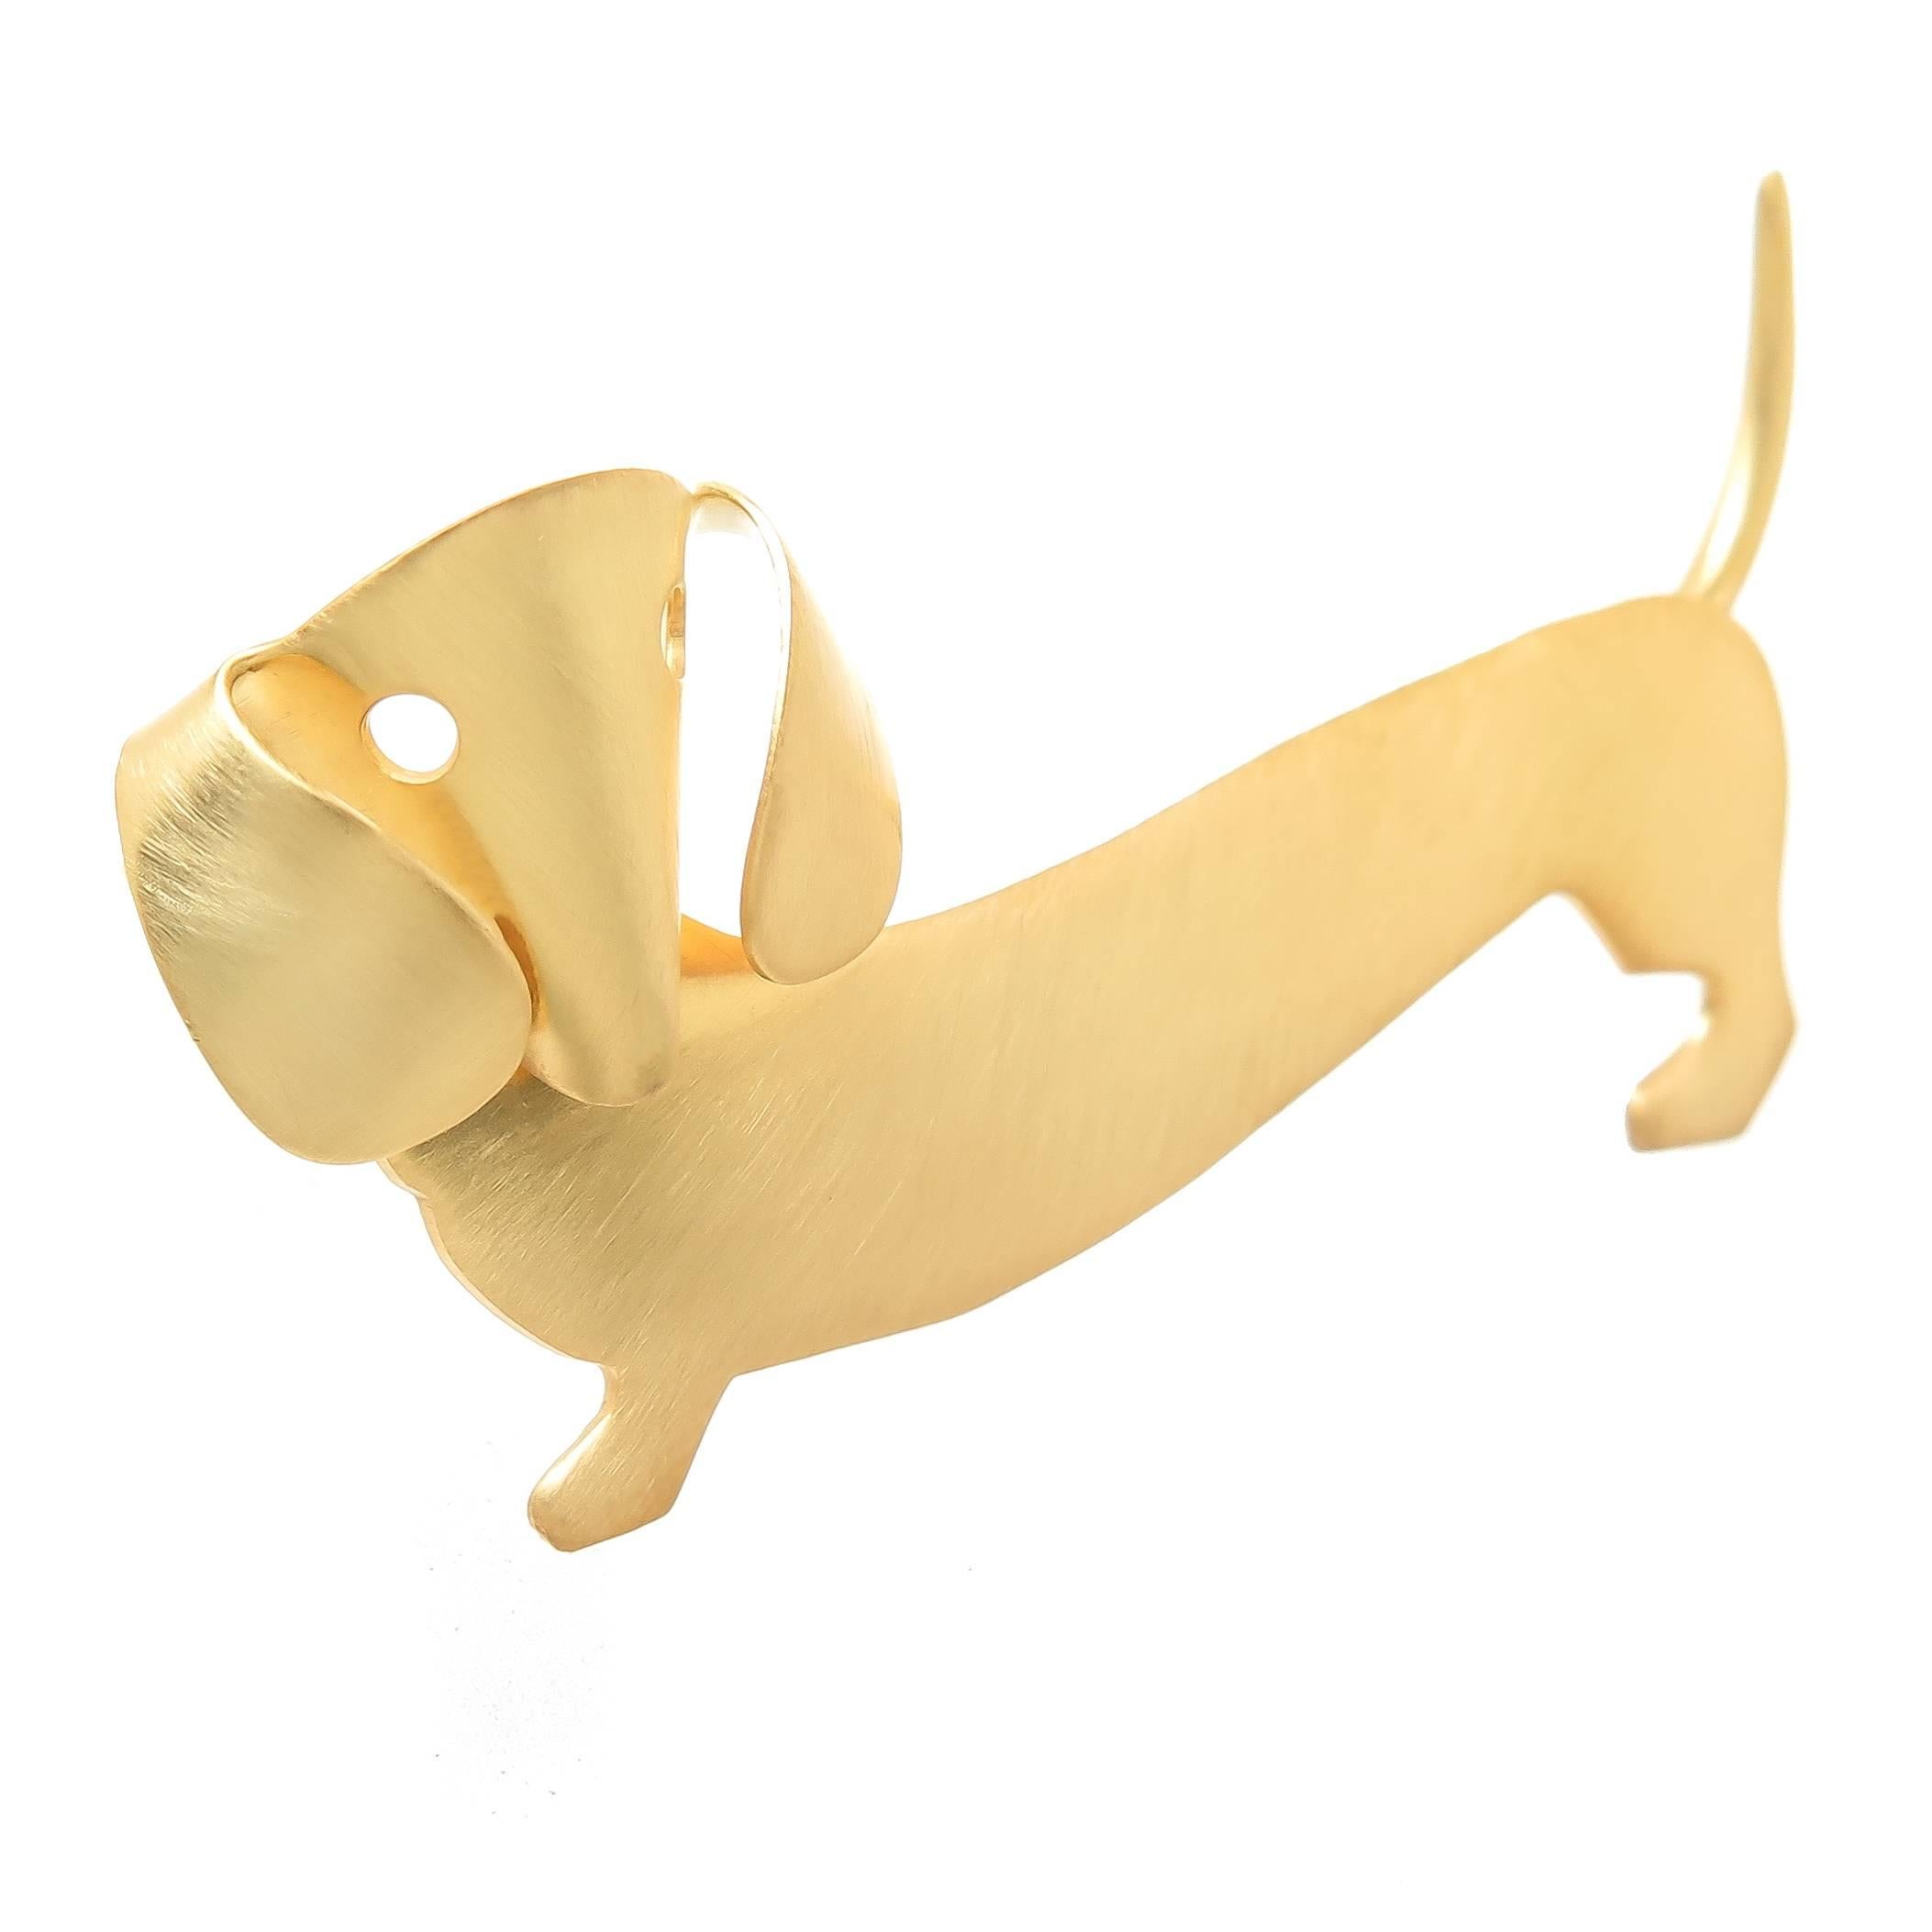 Circa 1960s Beau Vermeil, Gold Wash on Sterling Sterling Silver Dachshund Dog Brooch, measuring 2 inch in length x 1 inch.